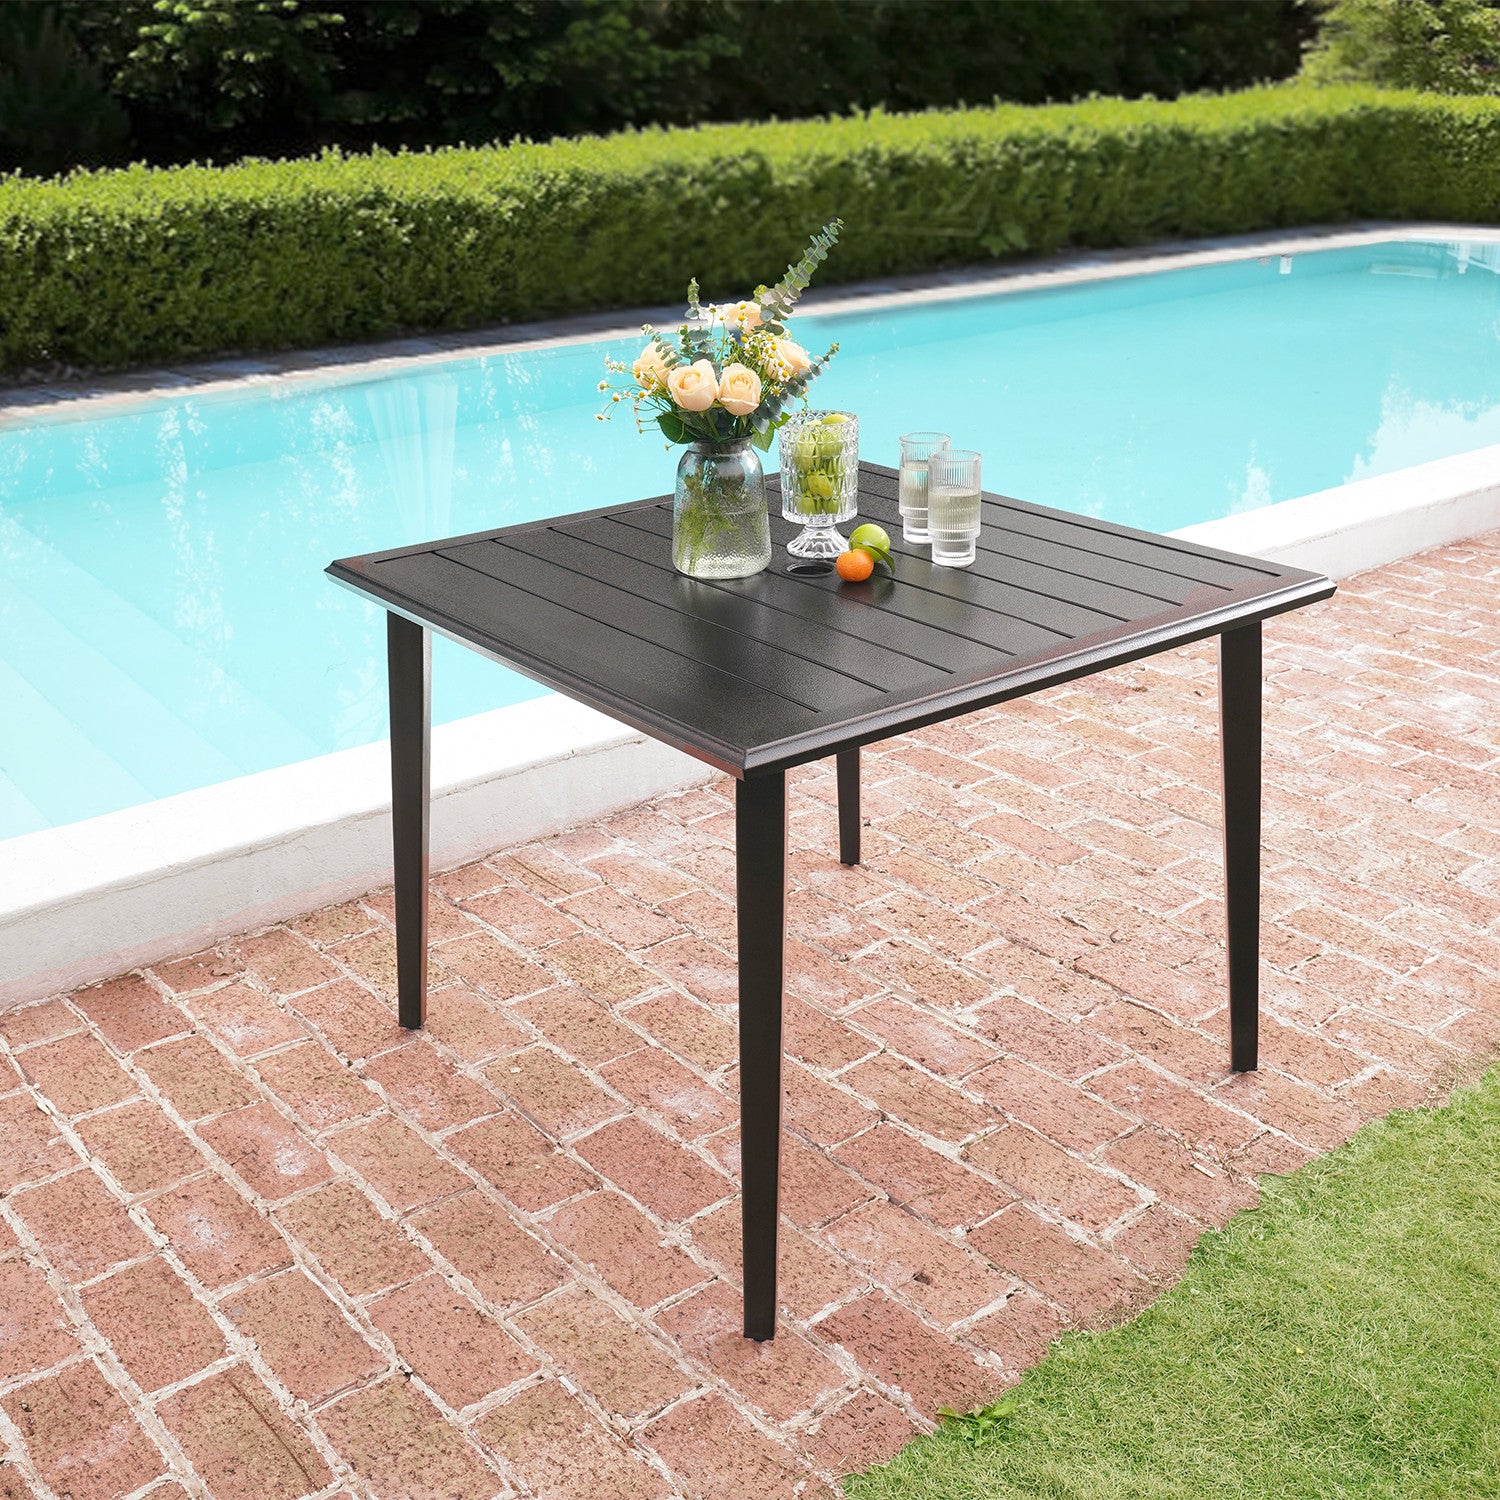 VICLLAX outdoor dining table